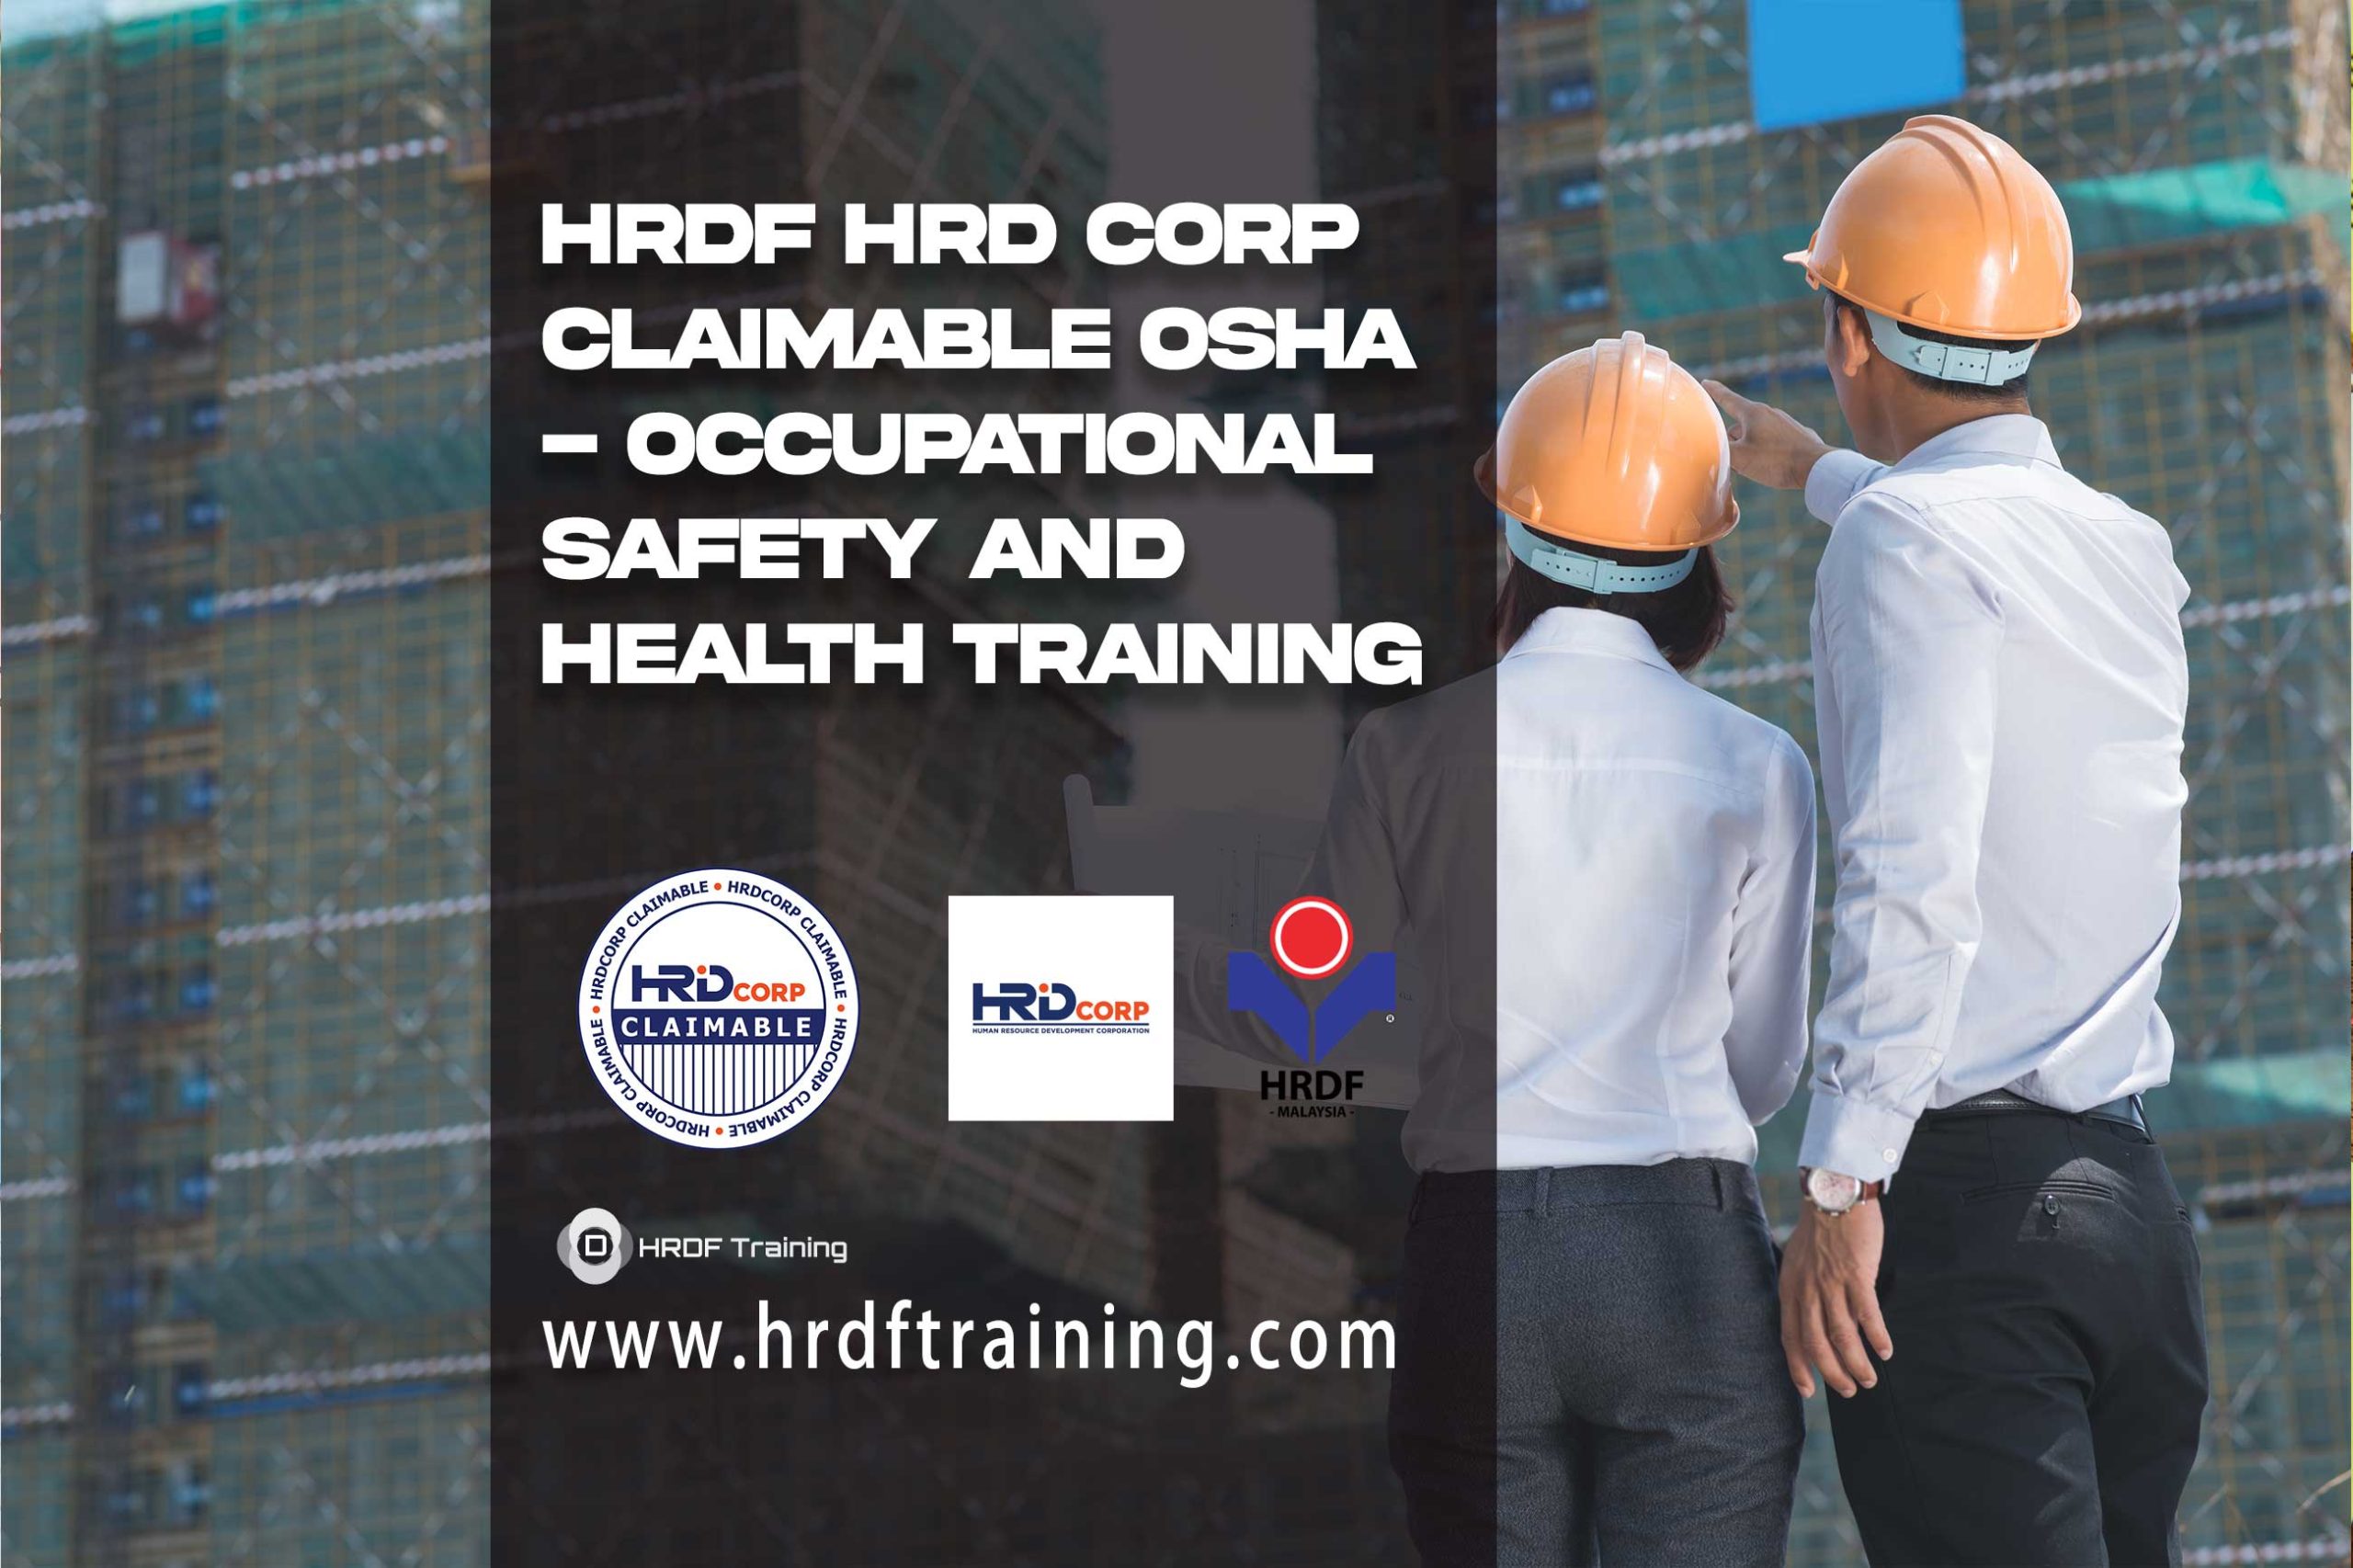 HRDF HRD Corp Claimable OSHA - Occupational Safety and Health Training